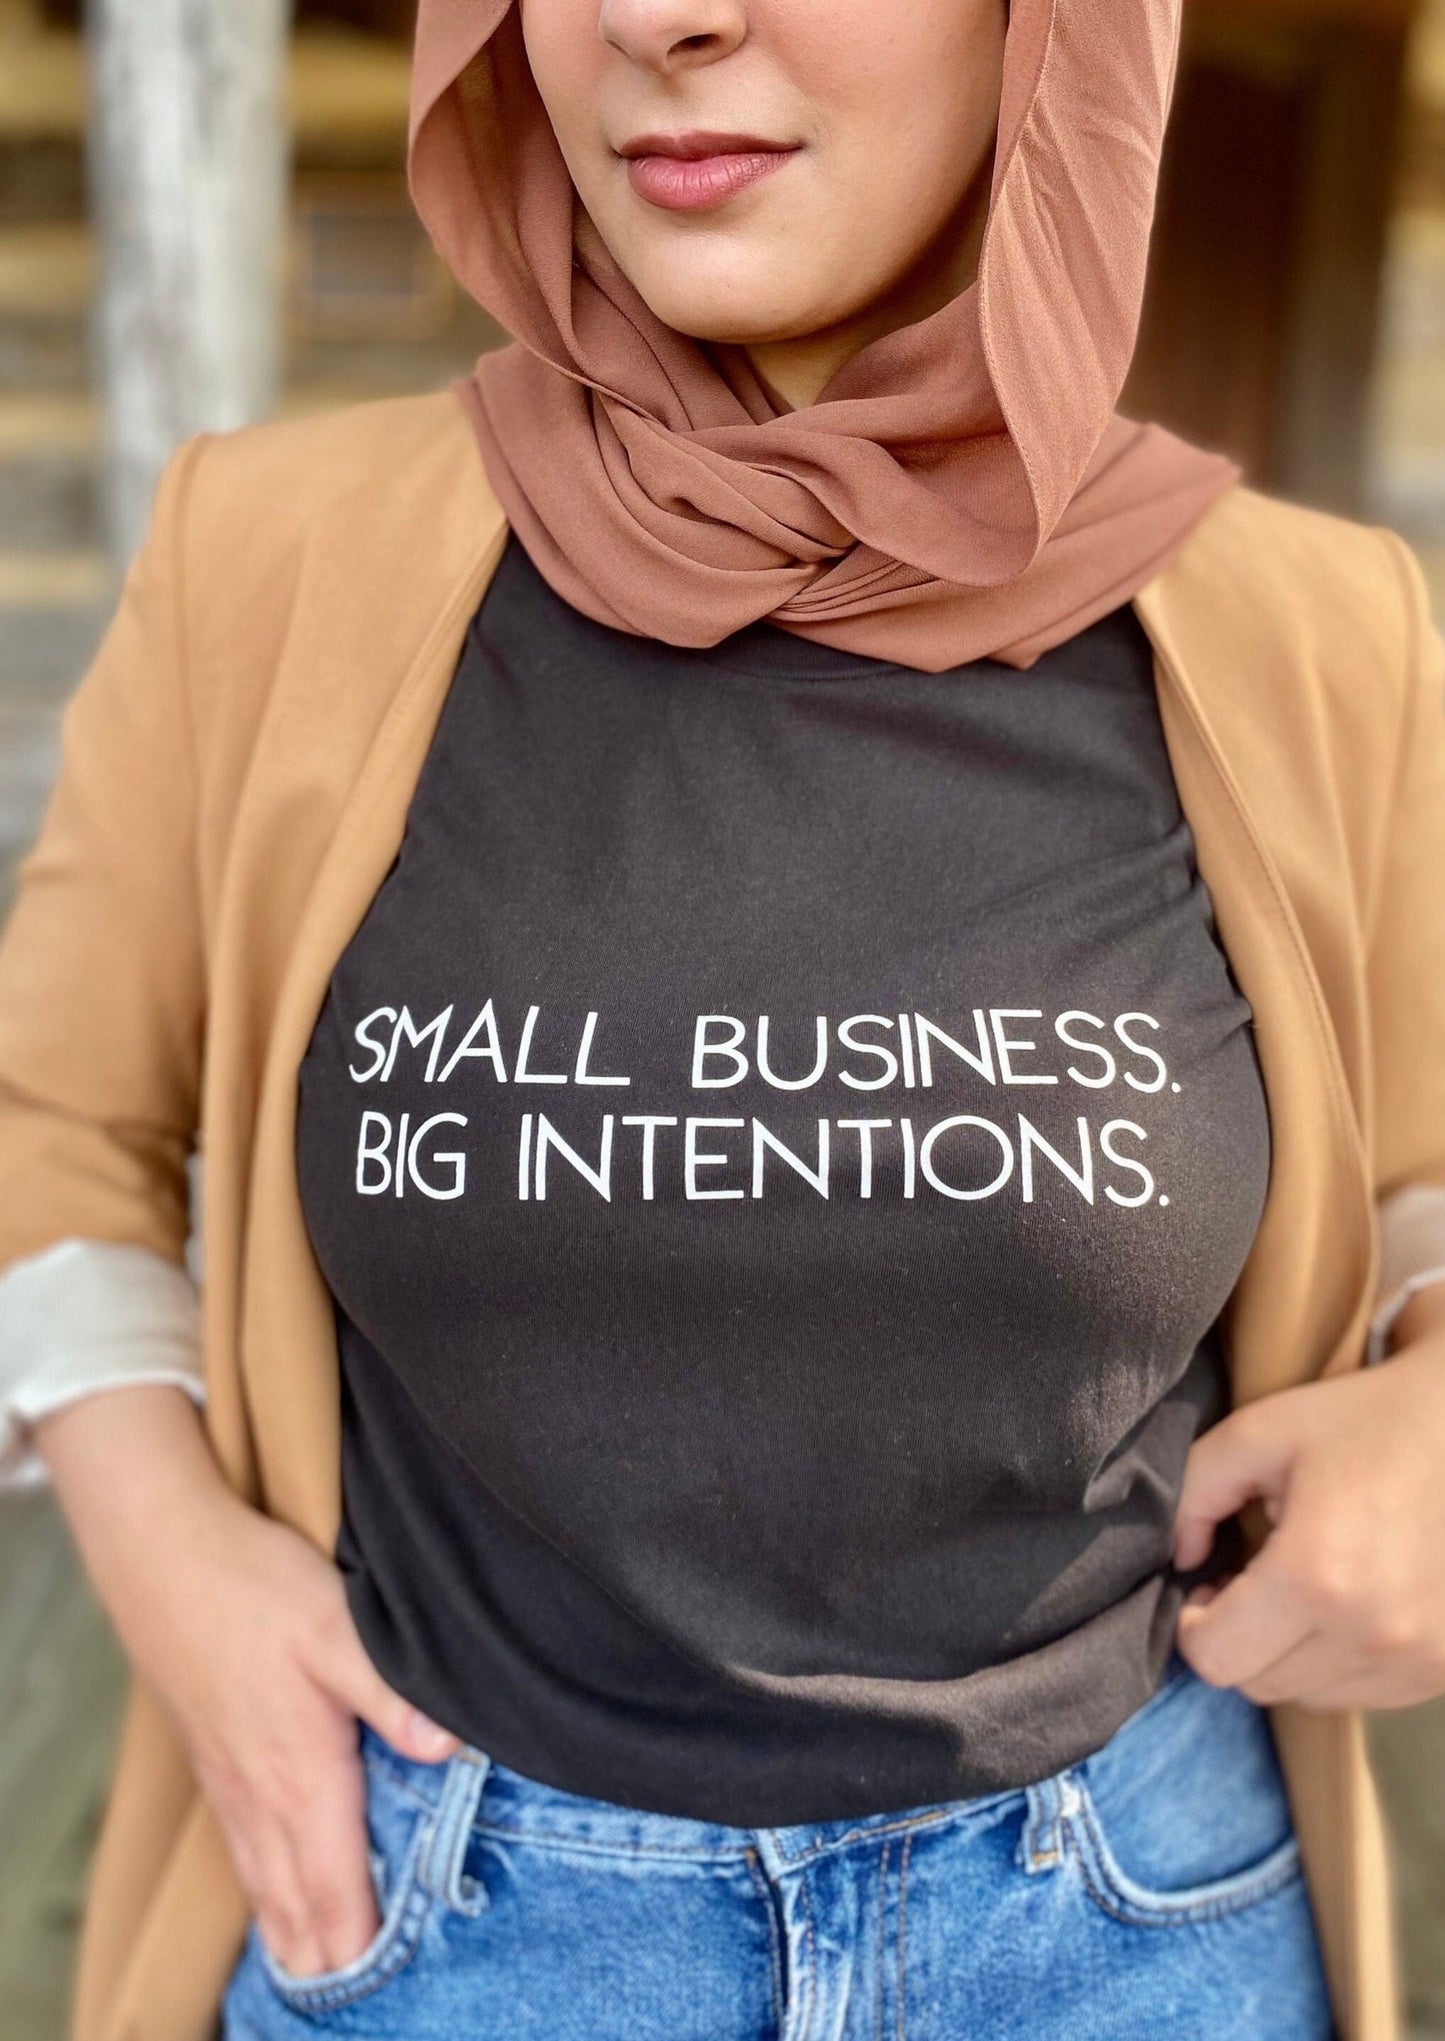 Small Business Big Intentions T-shirt - Unisex HTV - 100% organic Cotton T-Shirt -Small Business owner T-shirt-Small biz owner- Fall Fashion